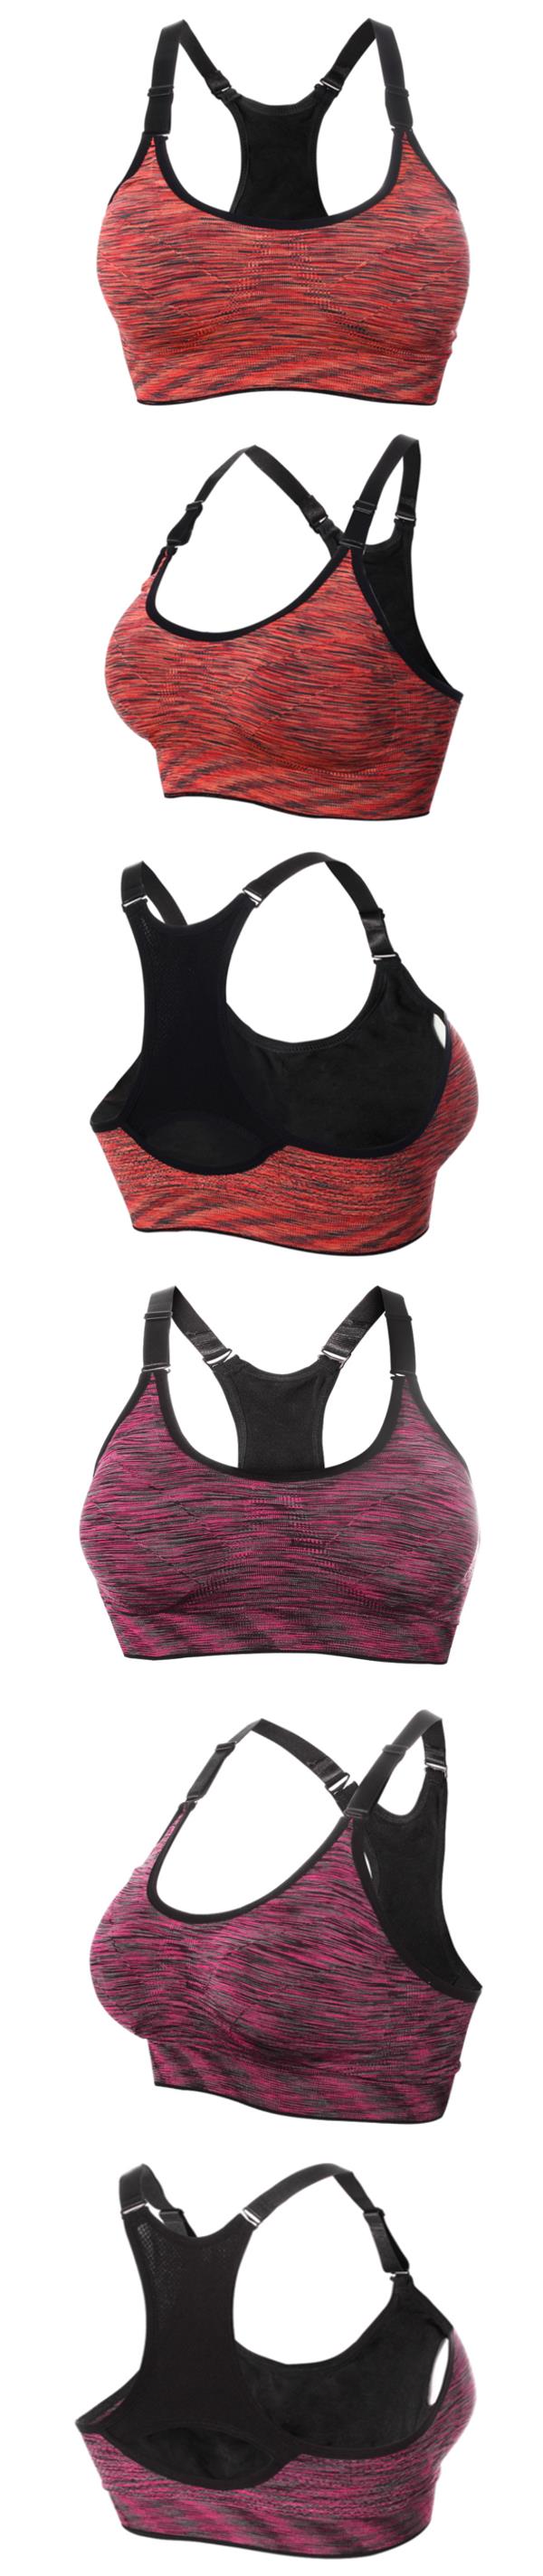 Women-Space-Dyeing-Wireless-Bra-Shakeproof-Stretch-Push-Up-Bras-Top-Seamless-Padded-Vest-1070058